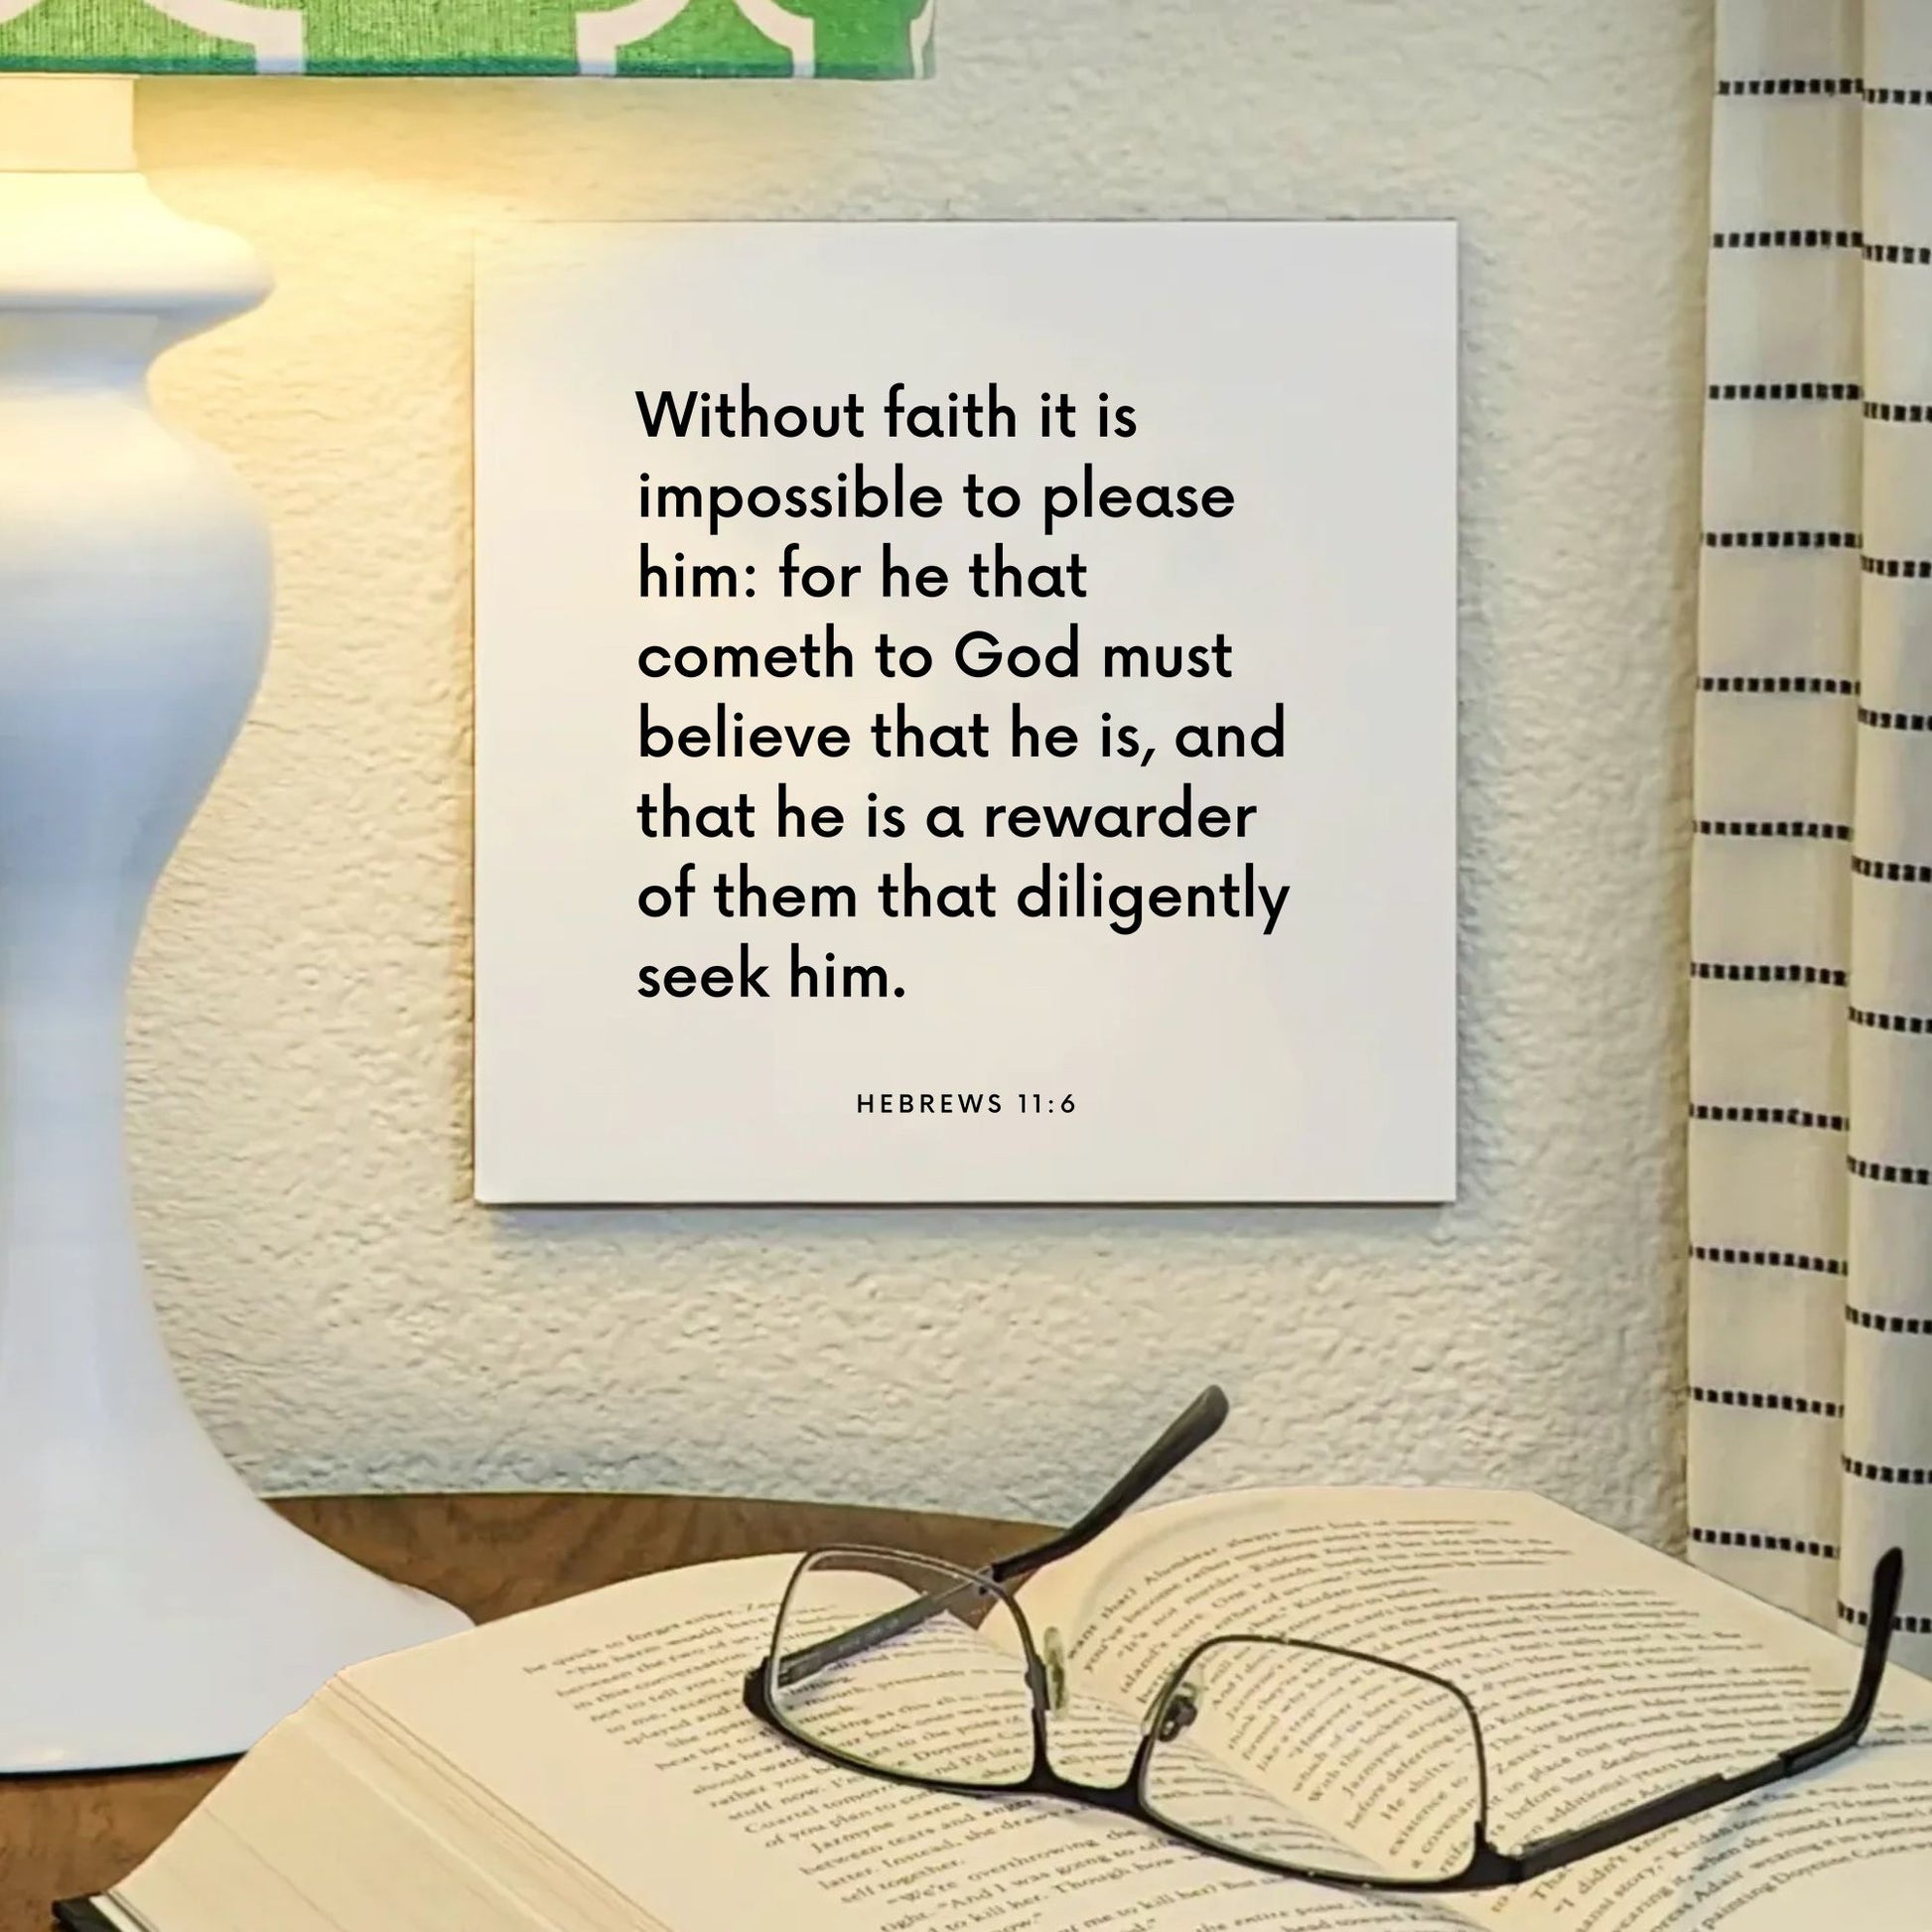 Lamp mouting of the scripture tile for Hebrews 11:6 - "Without faith it is impossible to please him"